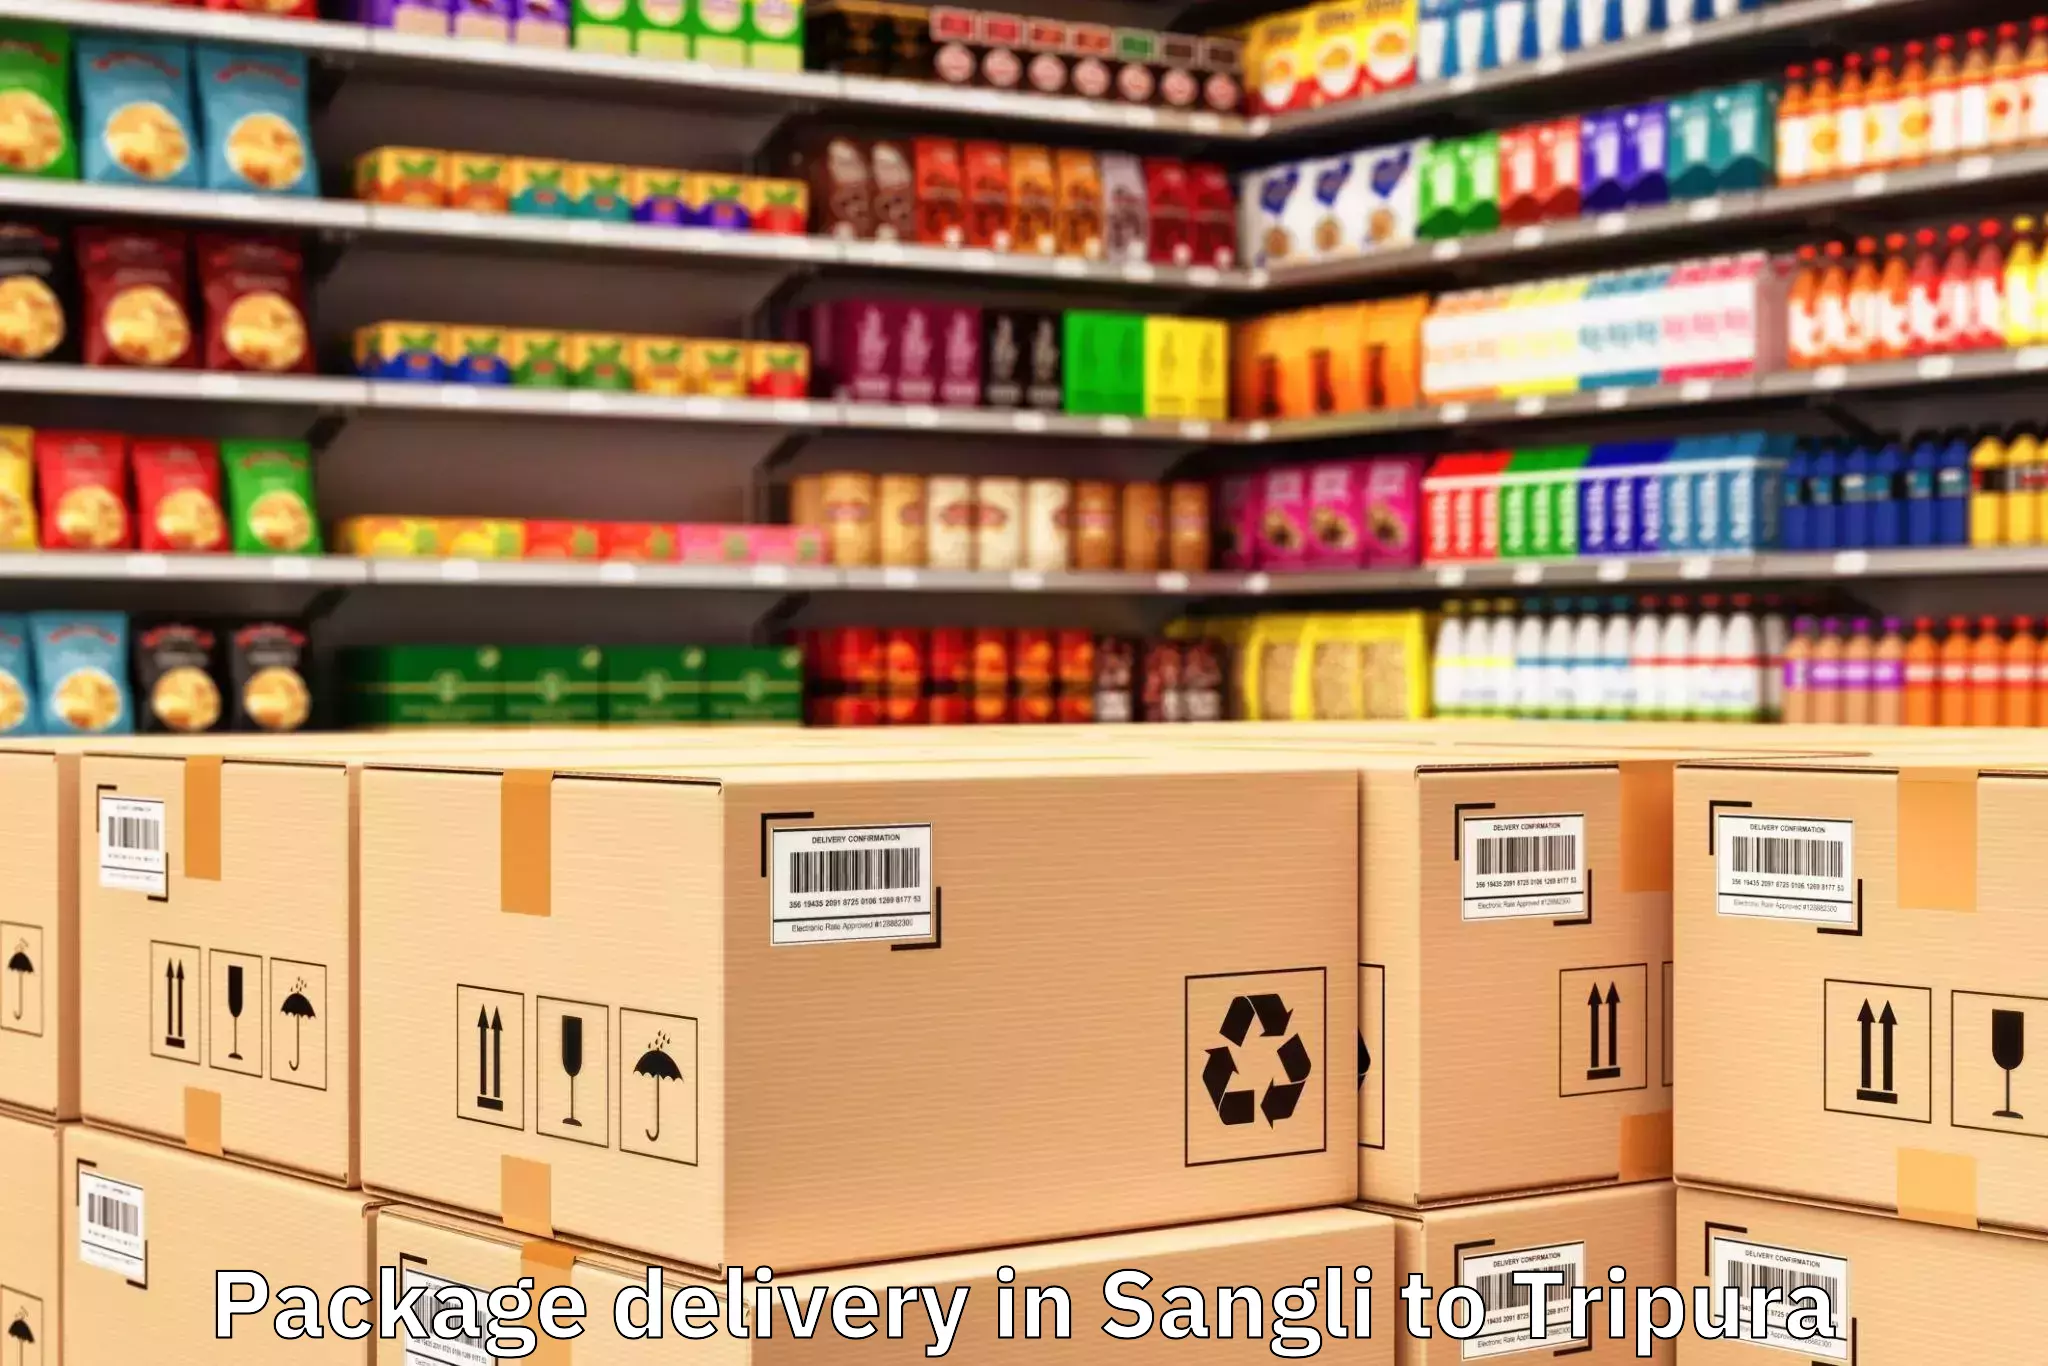 Discover Sangli to Tripura Package Delivery